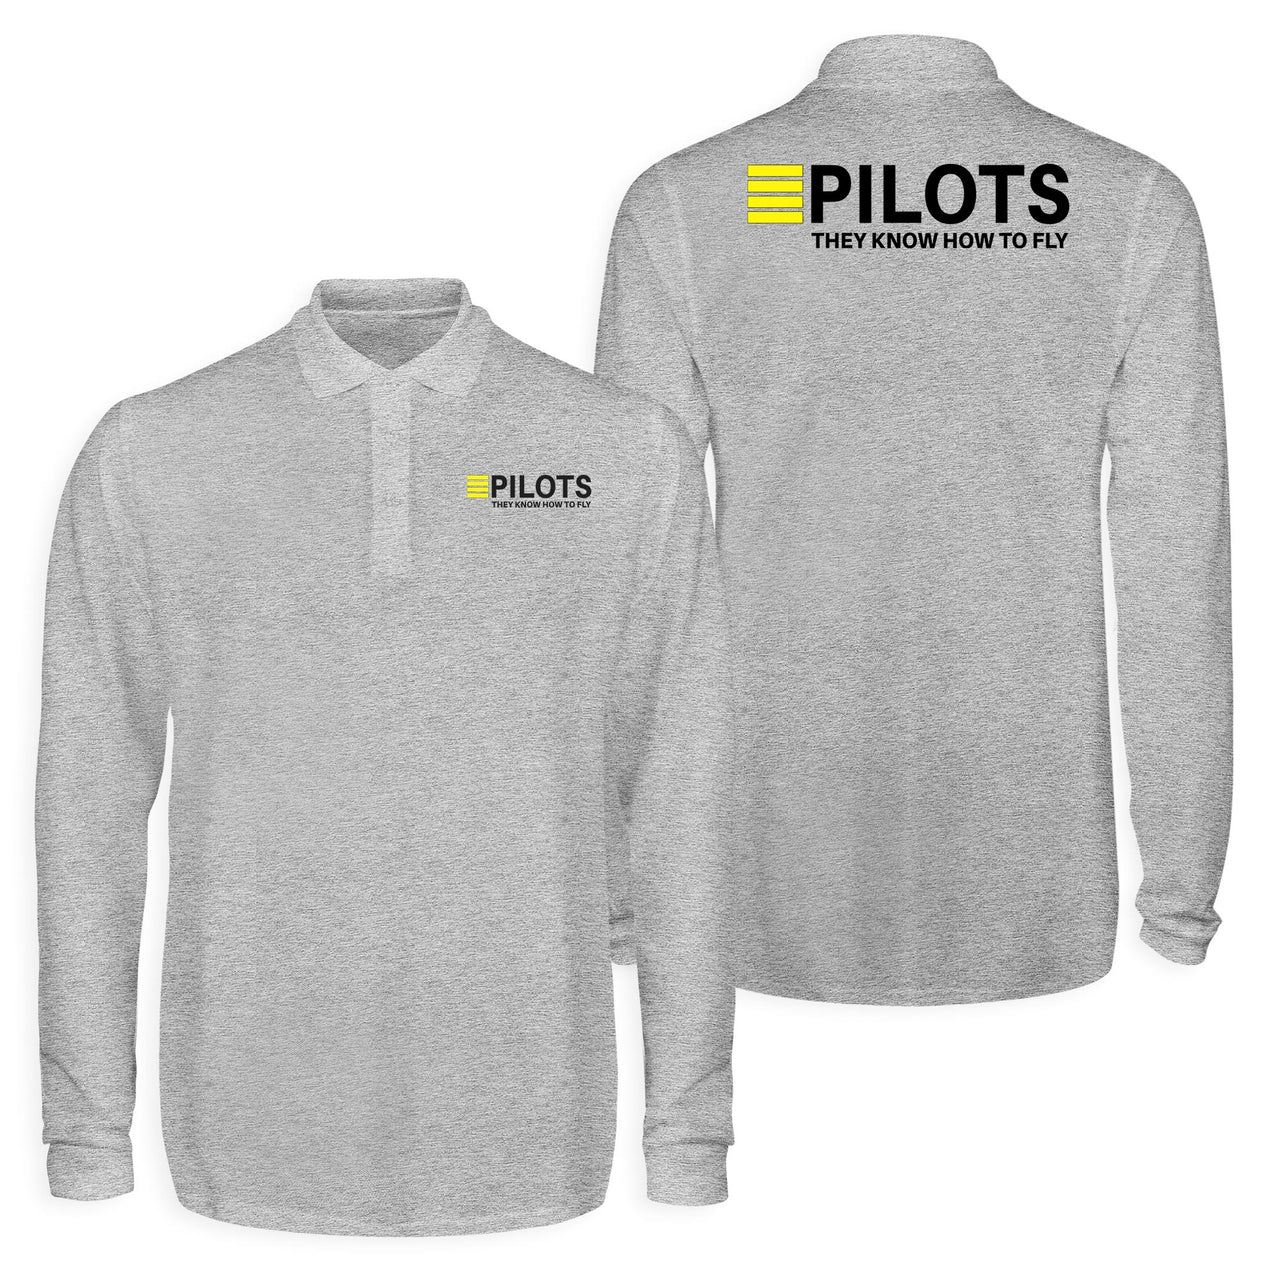 Pilots They Know How To Fly Designed Long Sleeve Polo T-Shirts (Double-Side)